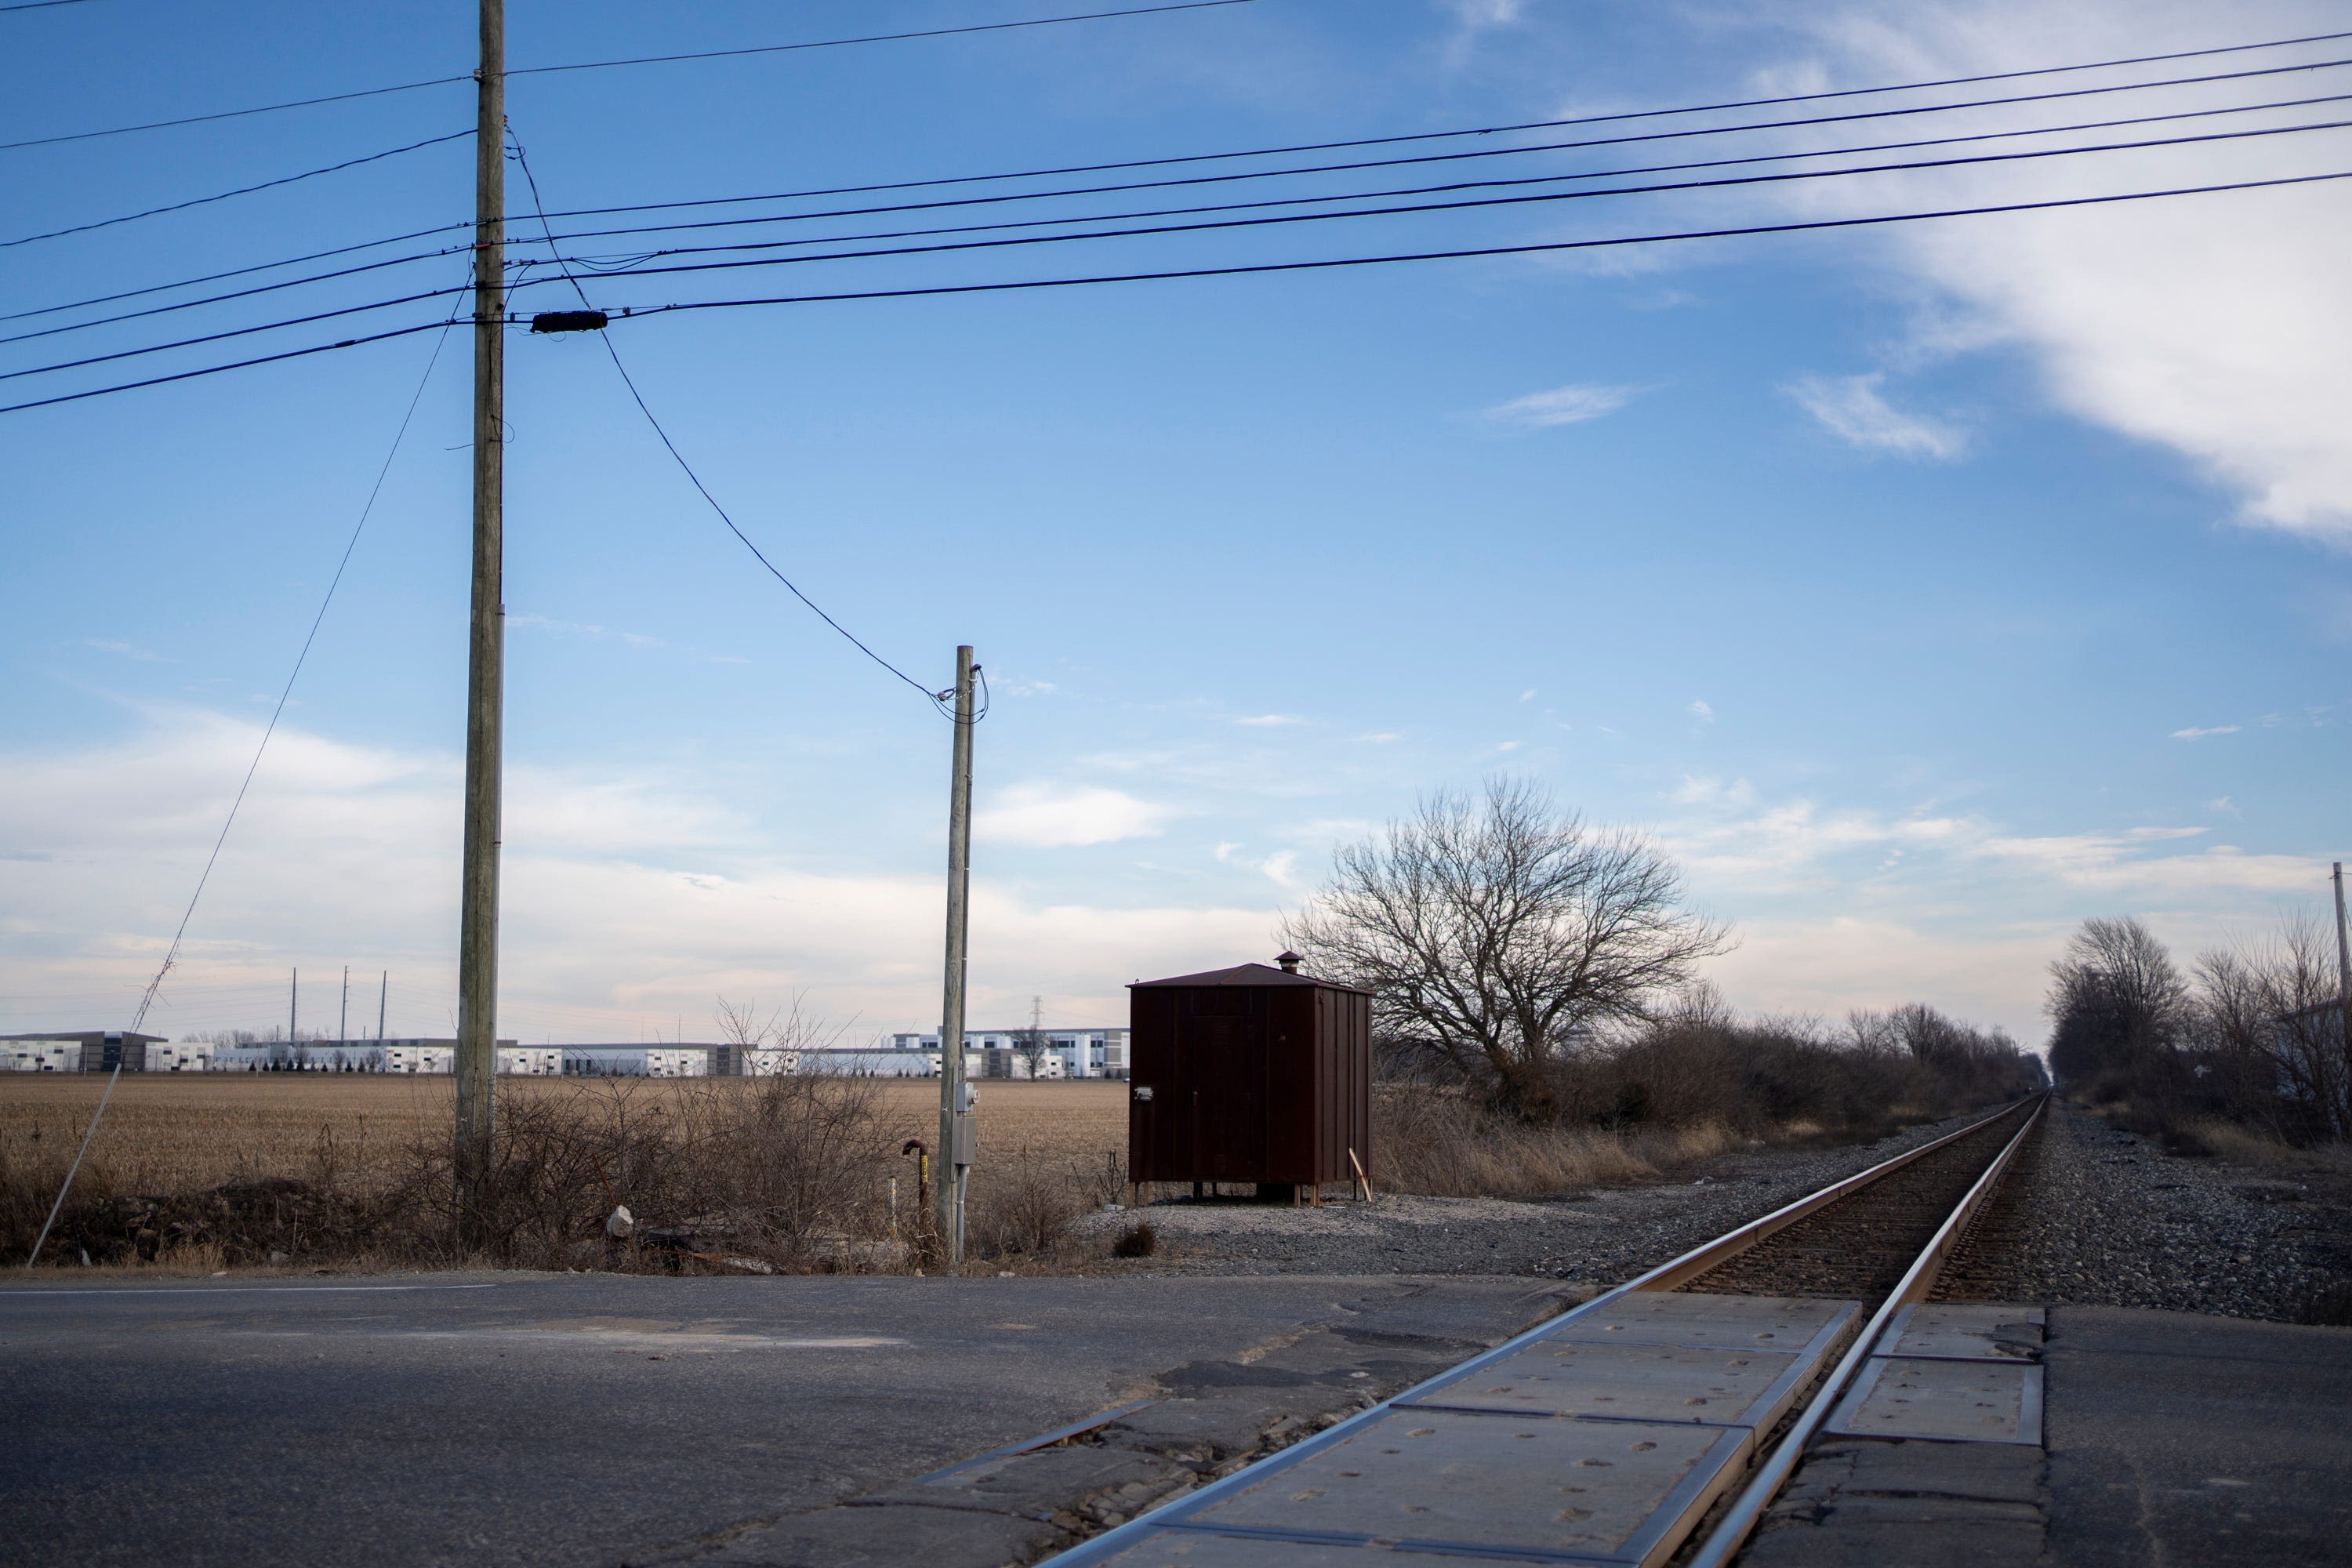 New passenger rail committee starts preparing for potential routes in Central Ohio